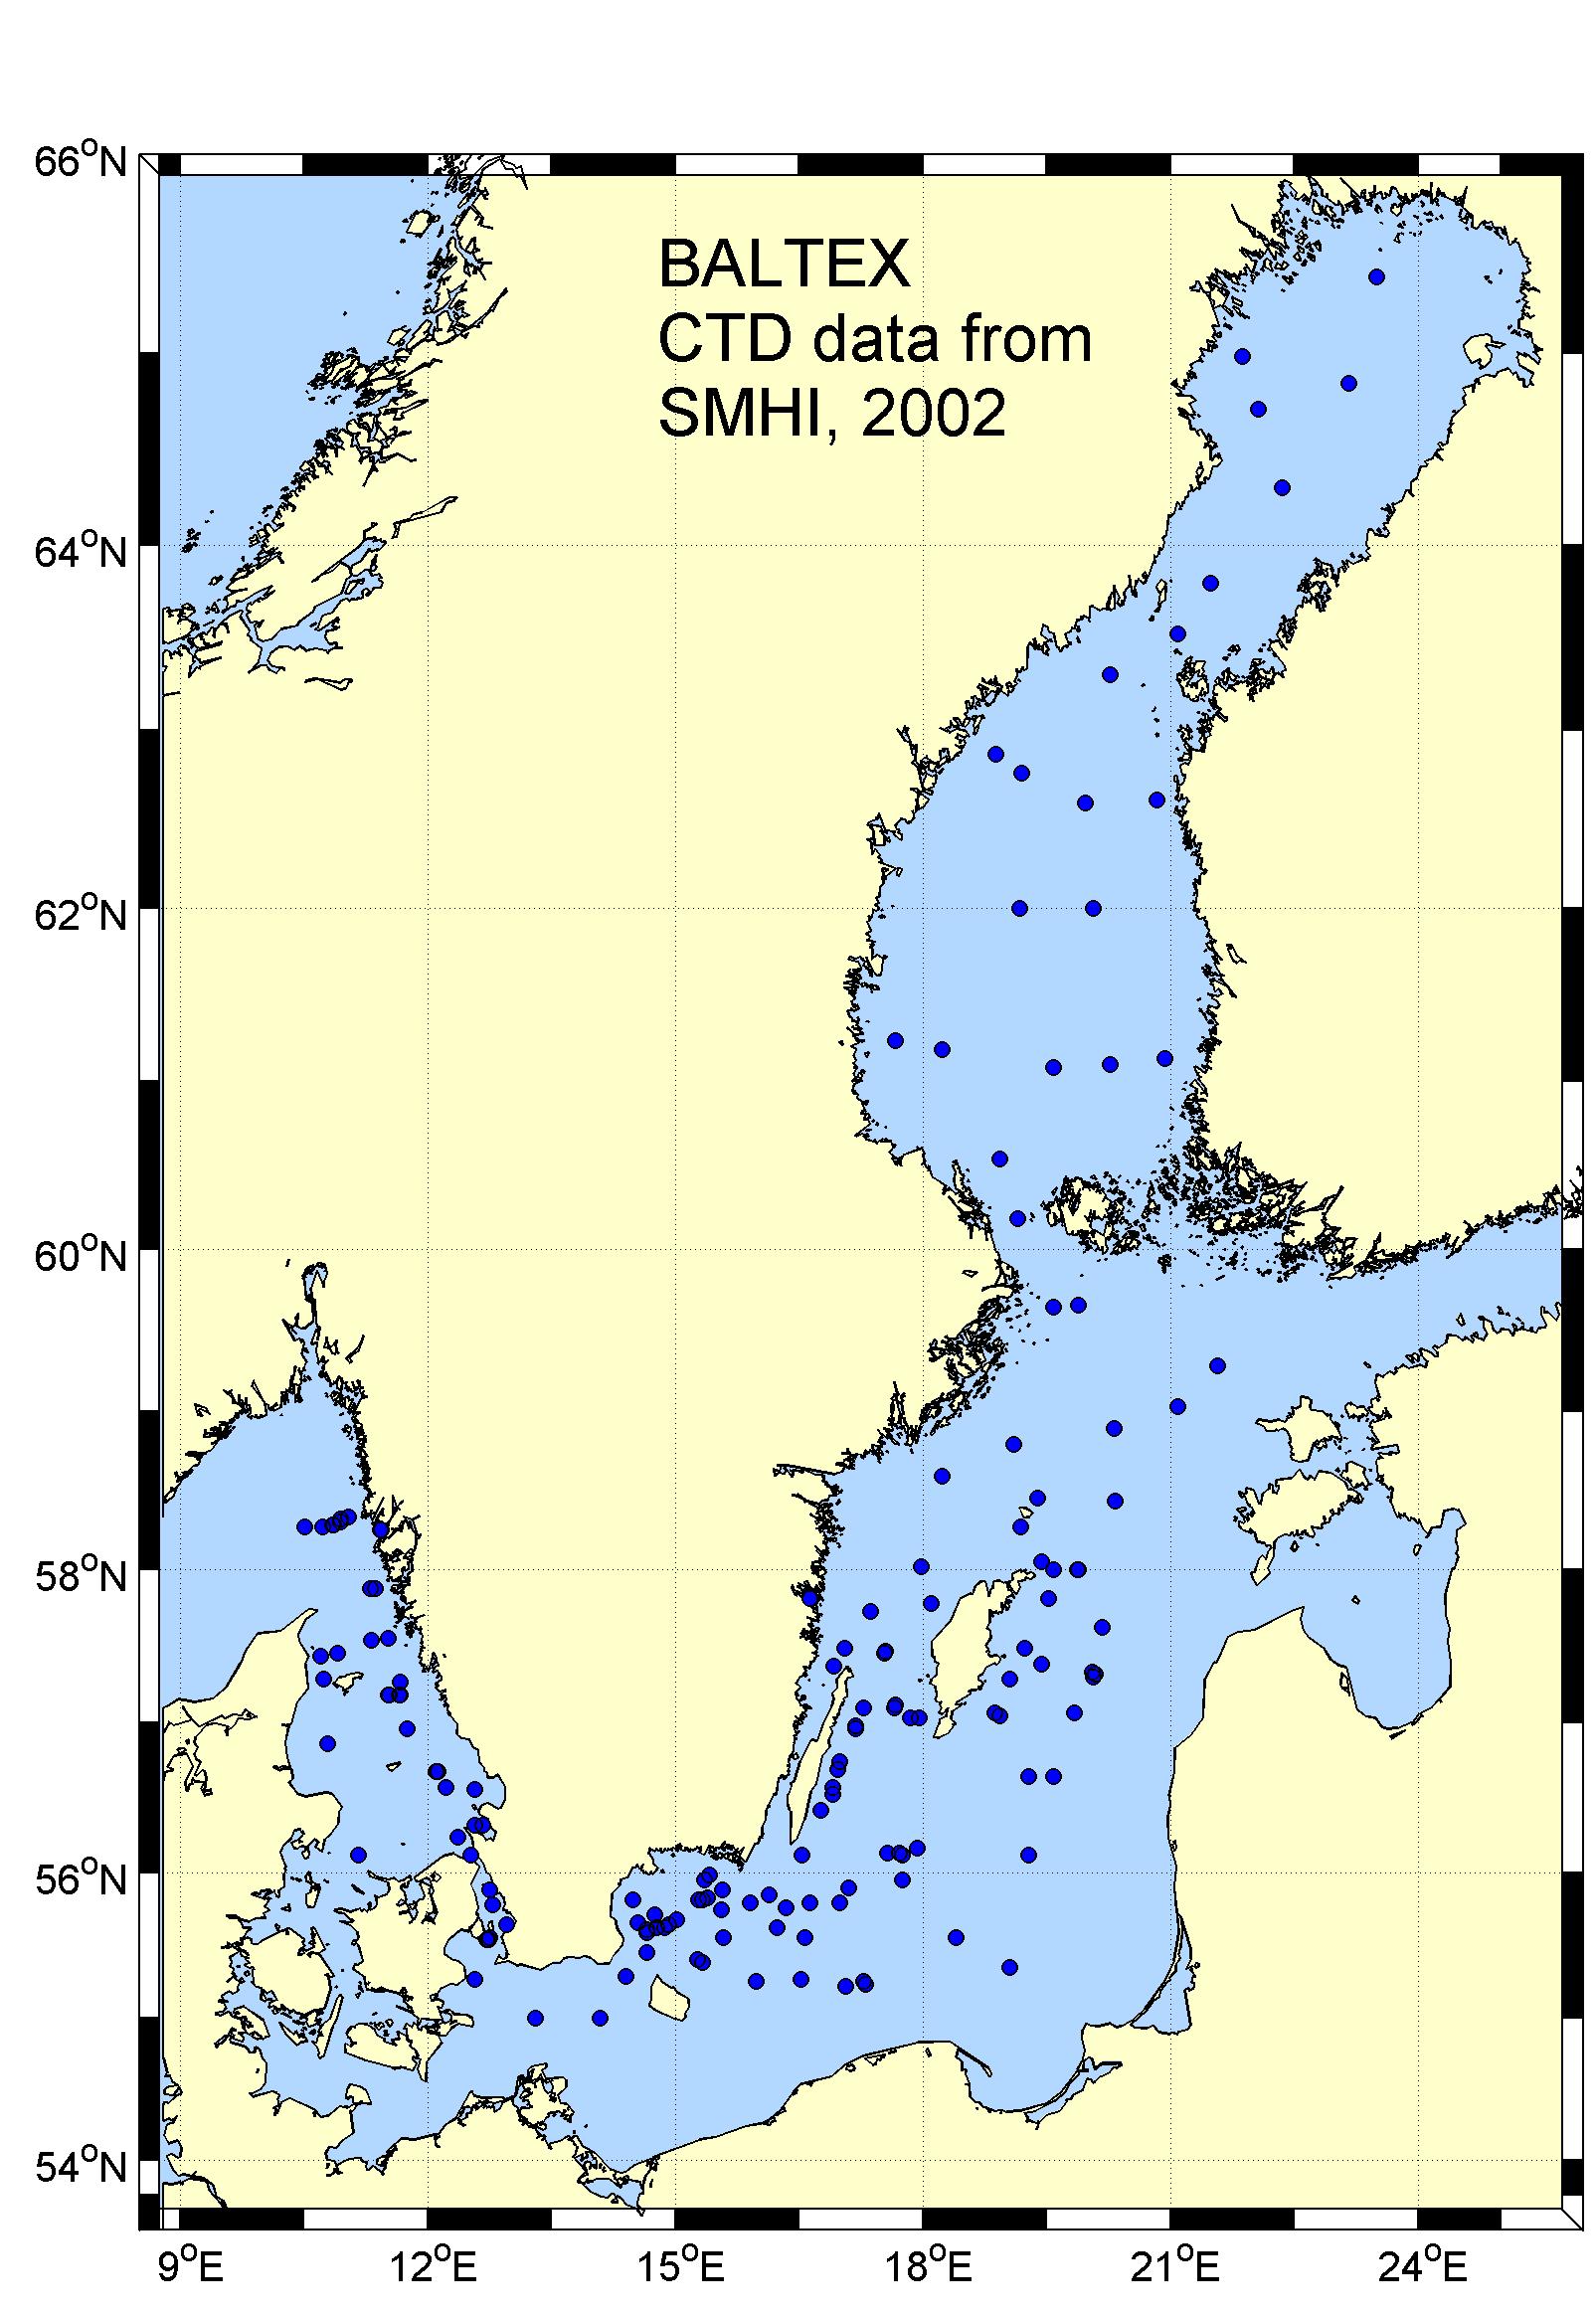 CTD cast data from SMHI, 2002